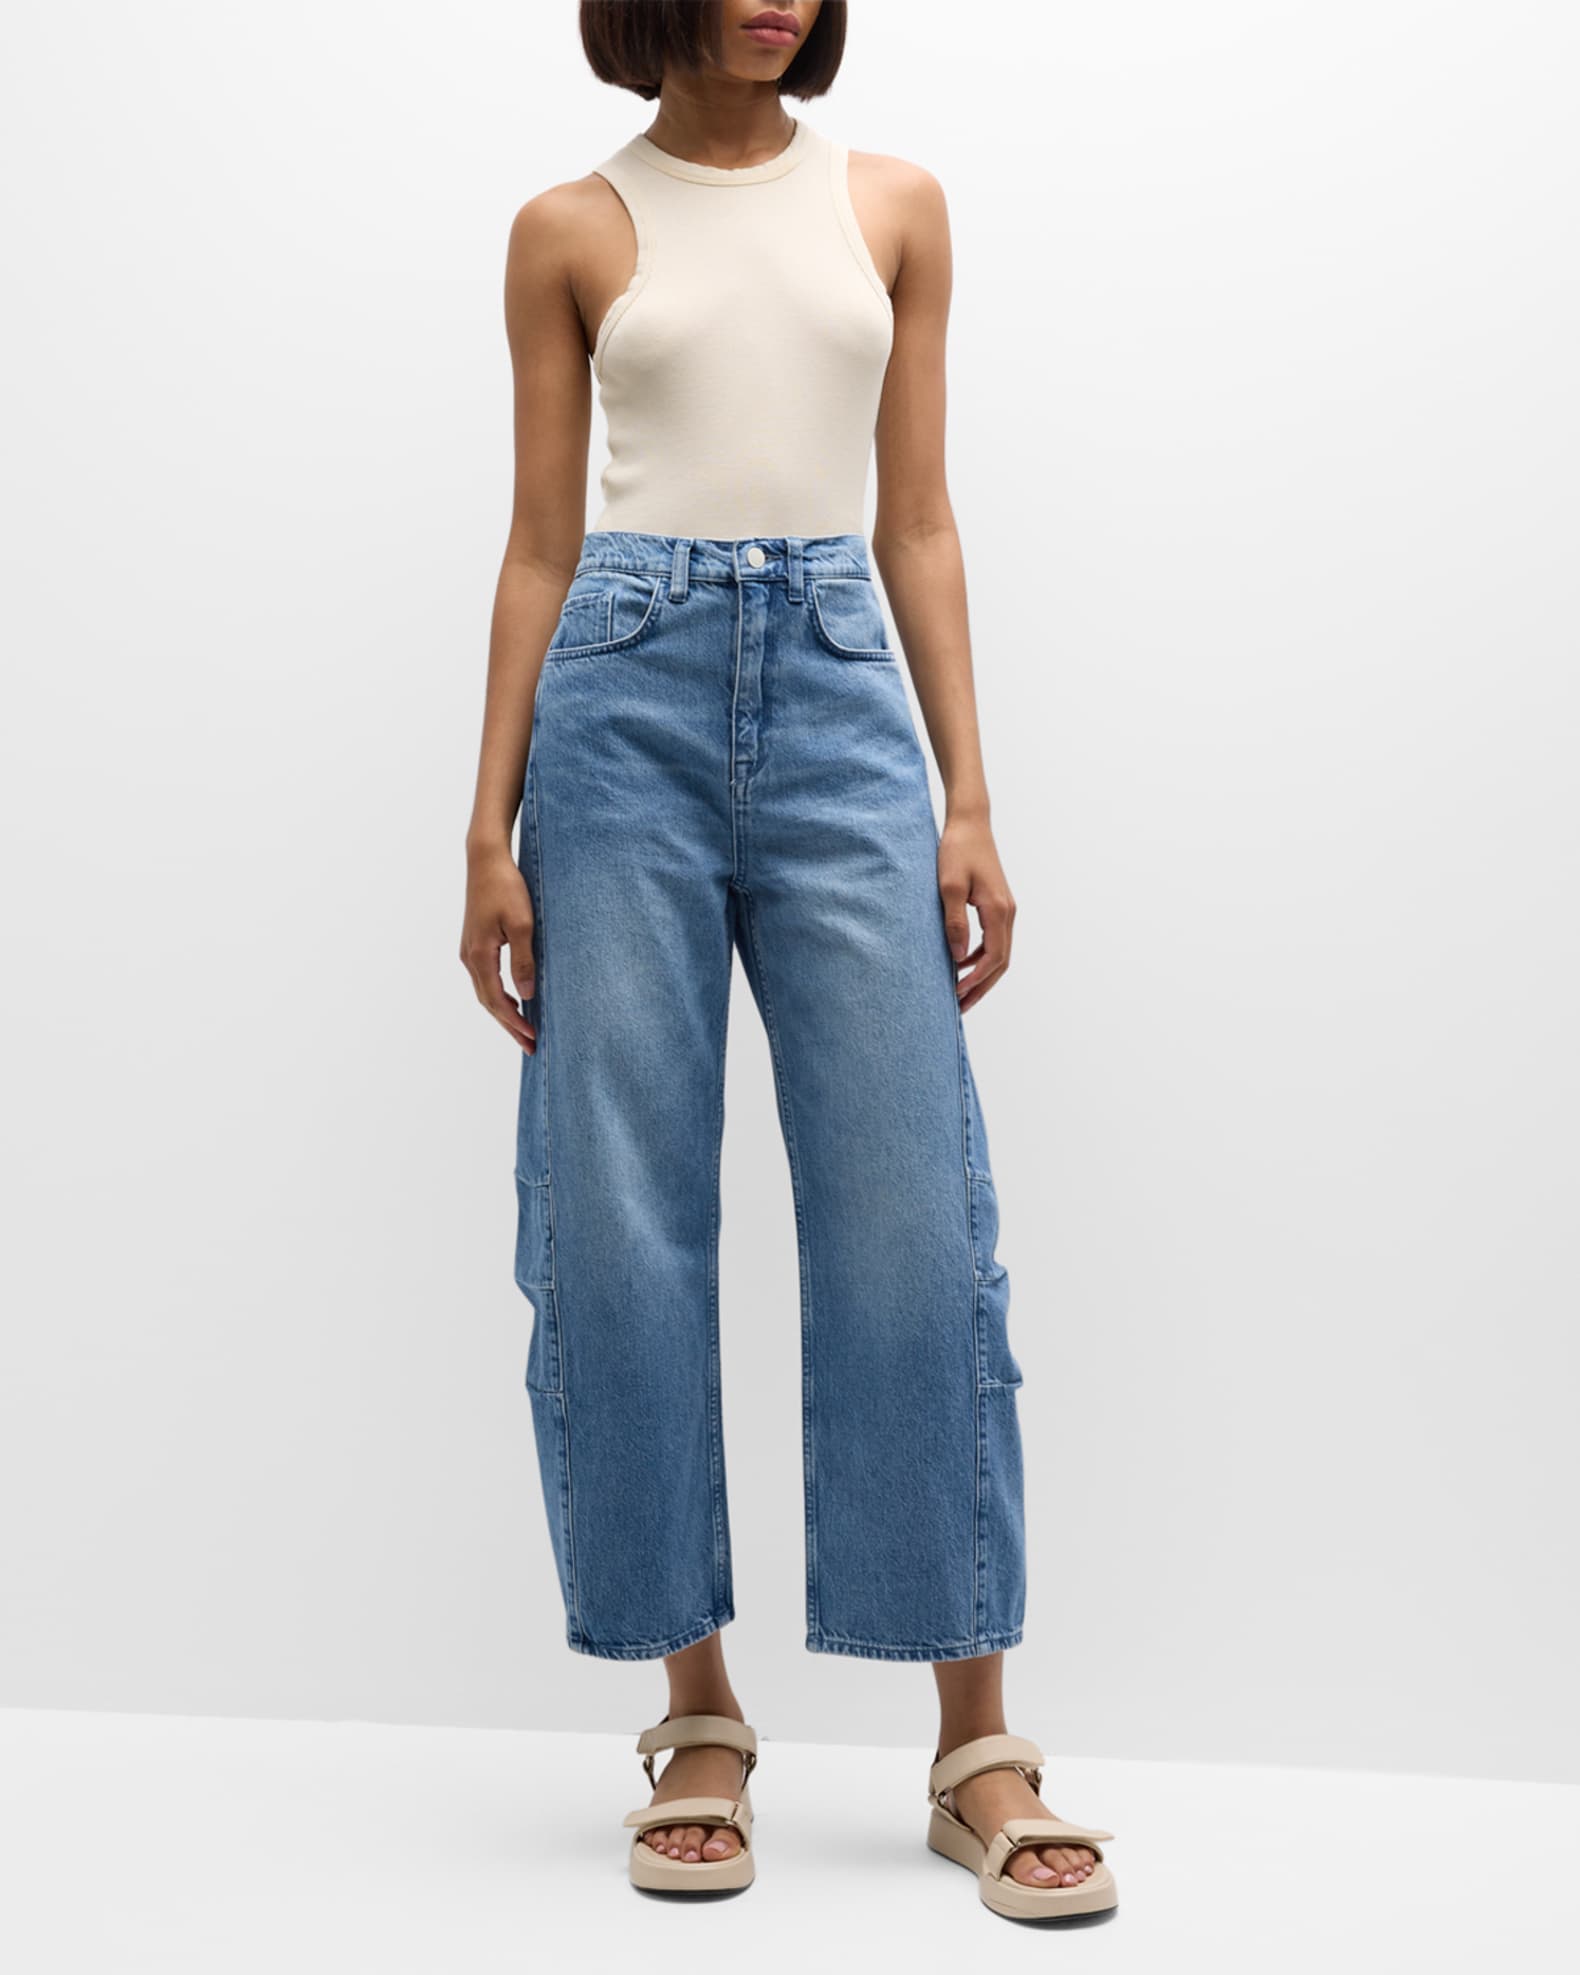 Triarchy Ms.Walker Mid-Rise Constructed Jeans | Neiman Marcus